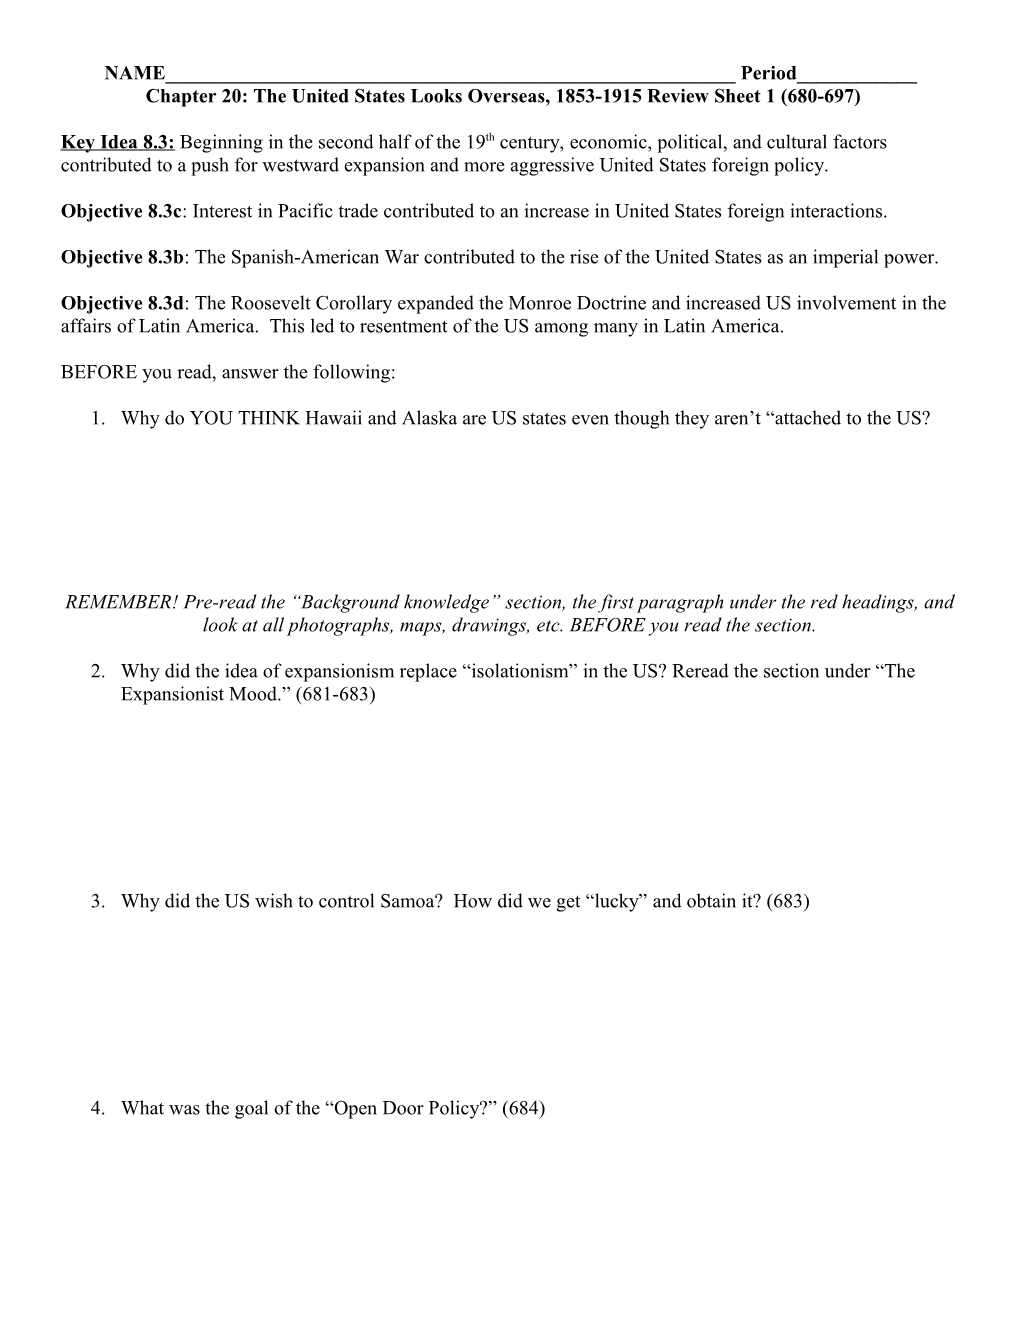 Chapter 20: the United States Looks Overseas, 1853-1915 Review Sheet 1